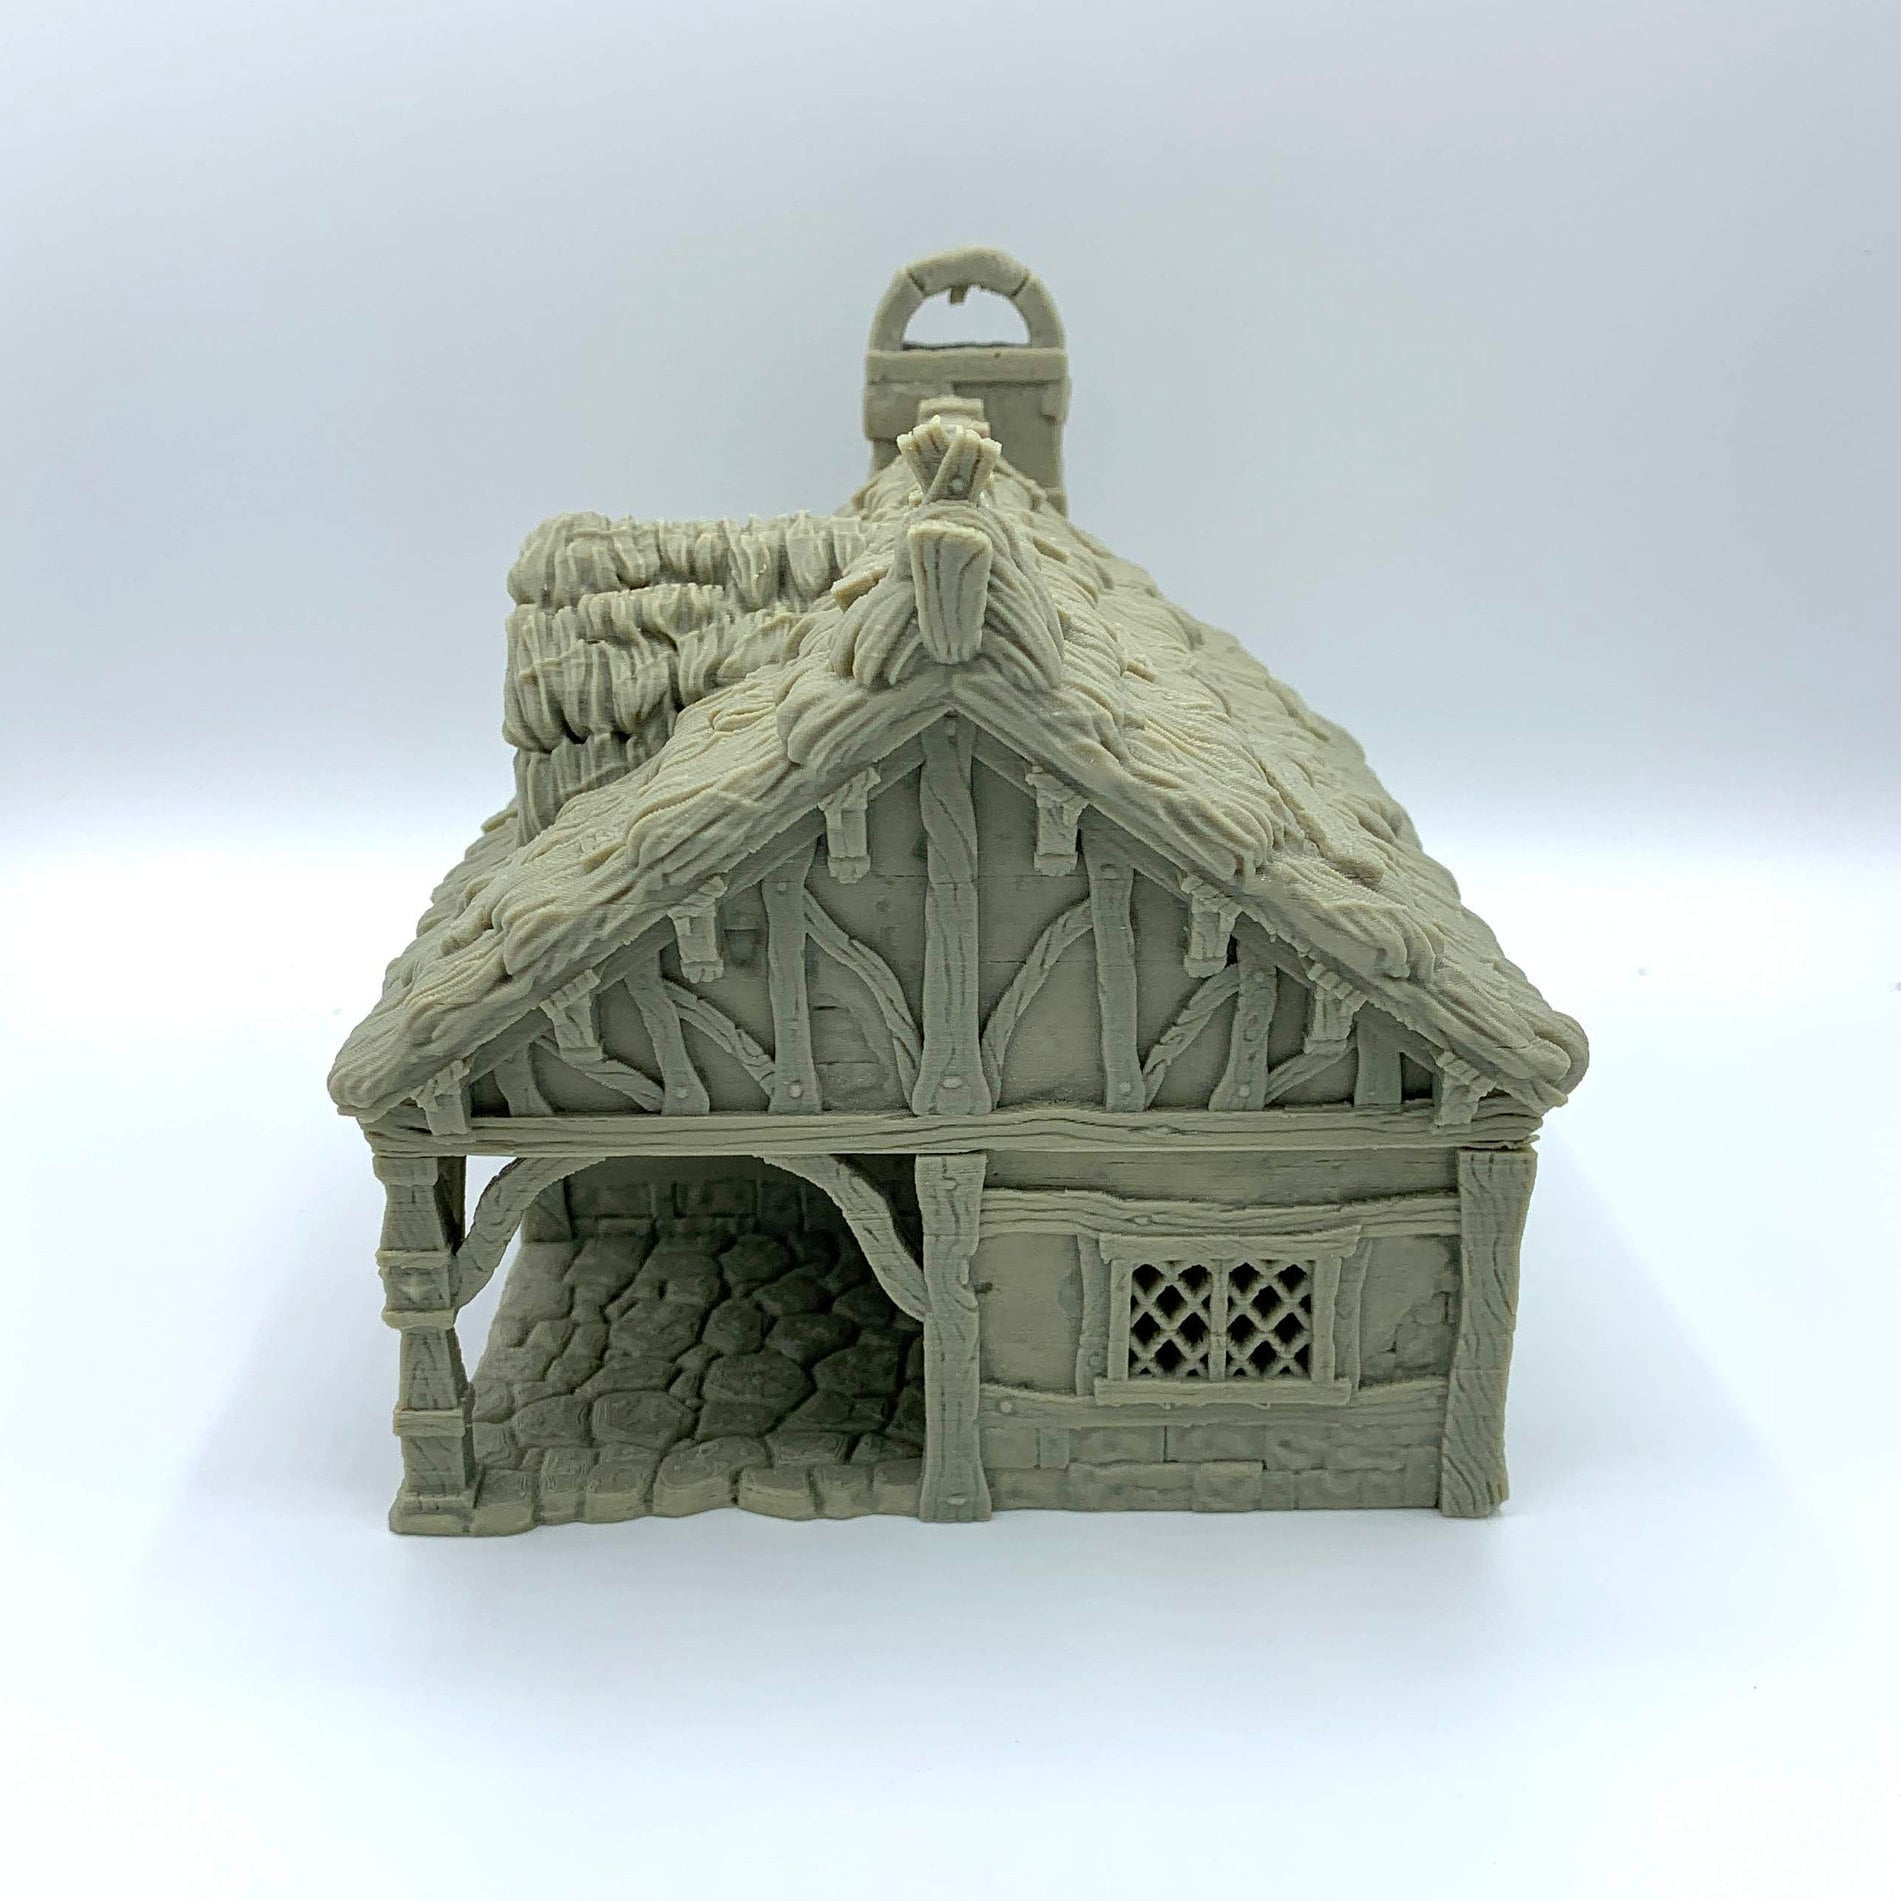 City Of Tarok - Medieval Cottage 2 Thatched Roof Version / 28mm Wargame / RPG 3d Printed Tabletop Terrain